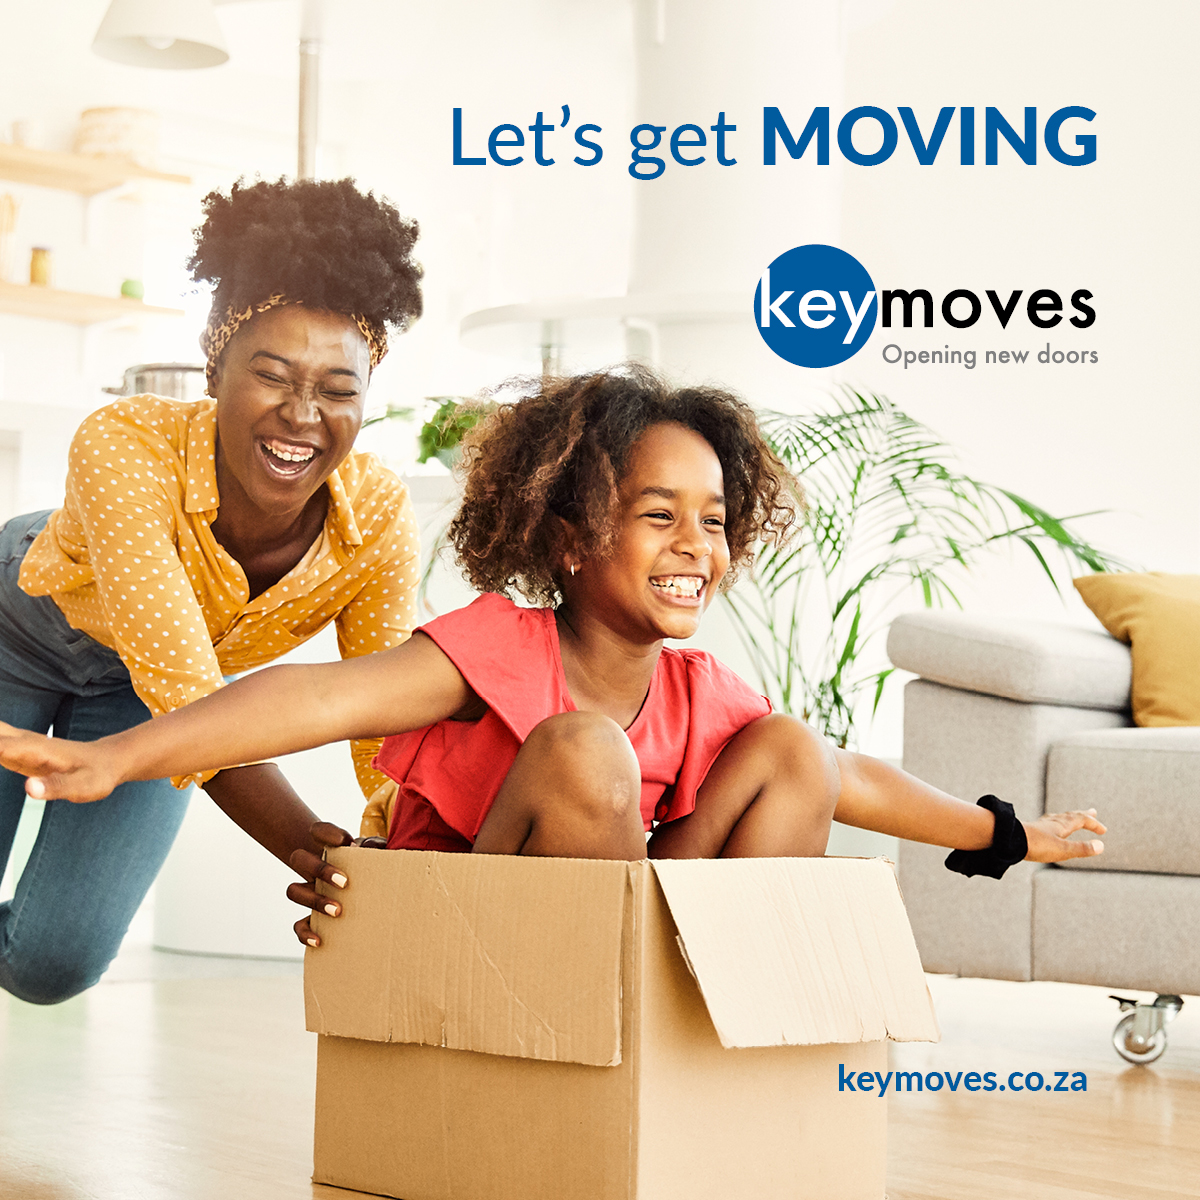 Moving doesn't necessarily need to translate to stress. Contact moving specialists to help. keymoves.co.za 

  #keymoves #moving #relocationSA #movingservices #corporatemoves #relocating #newhome #officerelocating 

#packingservice #residentialmoves